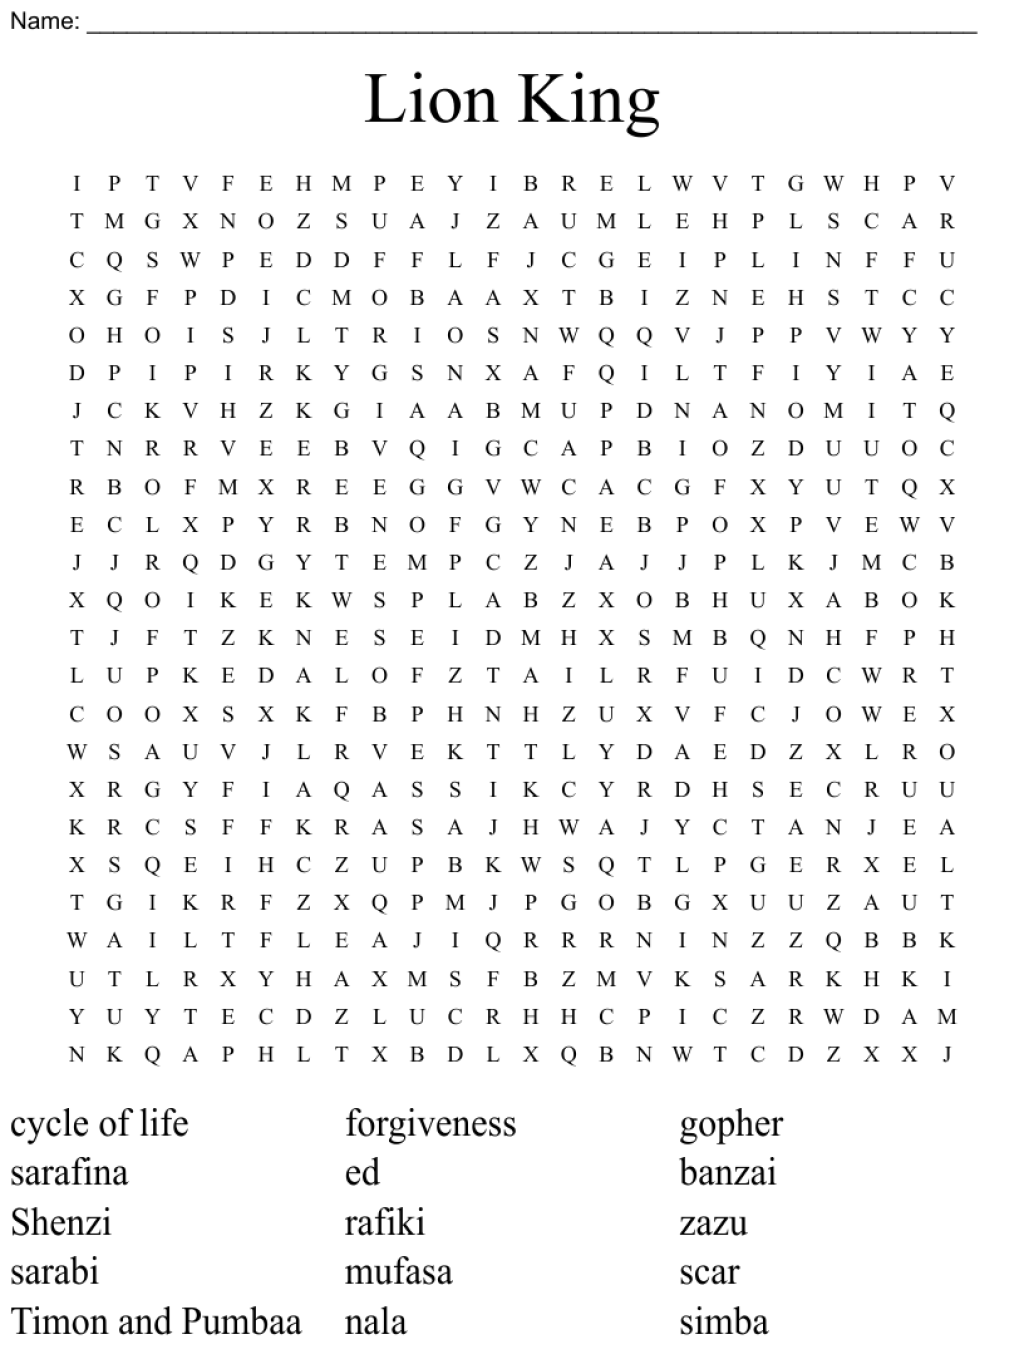 Picture of: The Lion King Crossword – WordMint